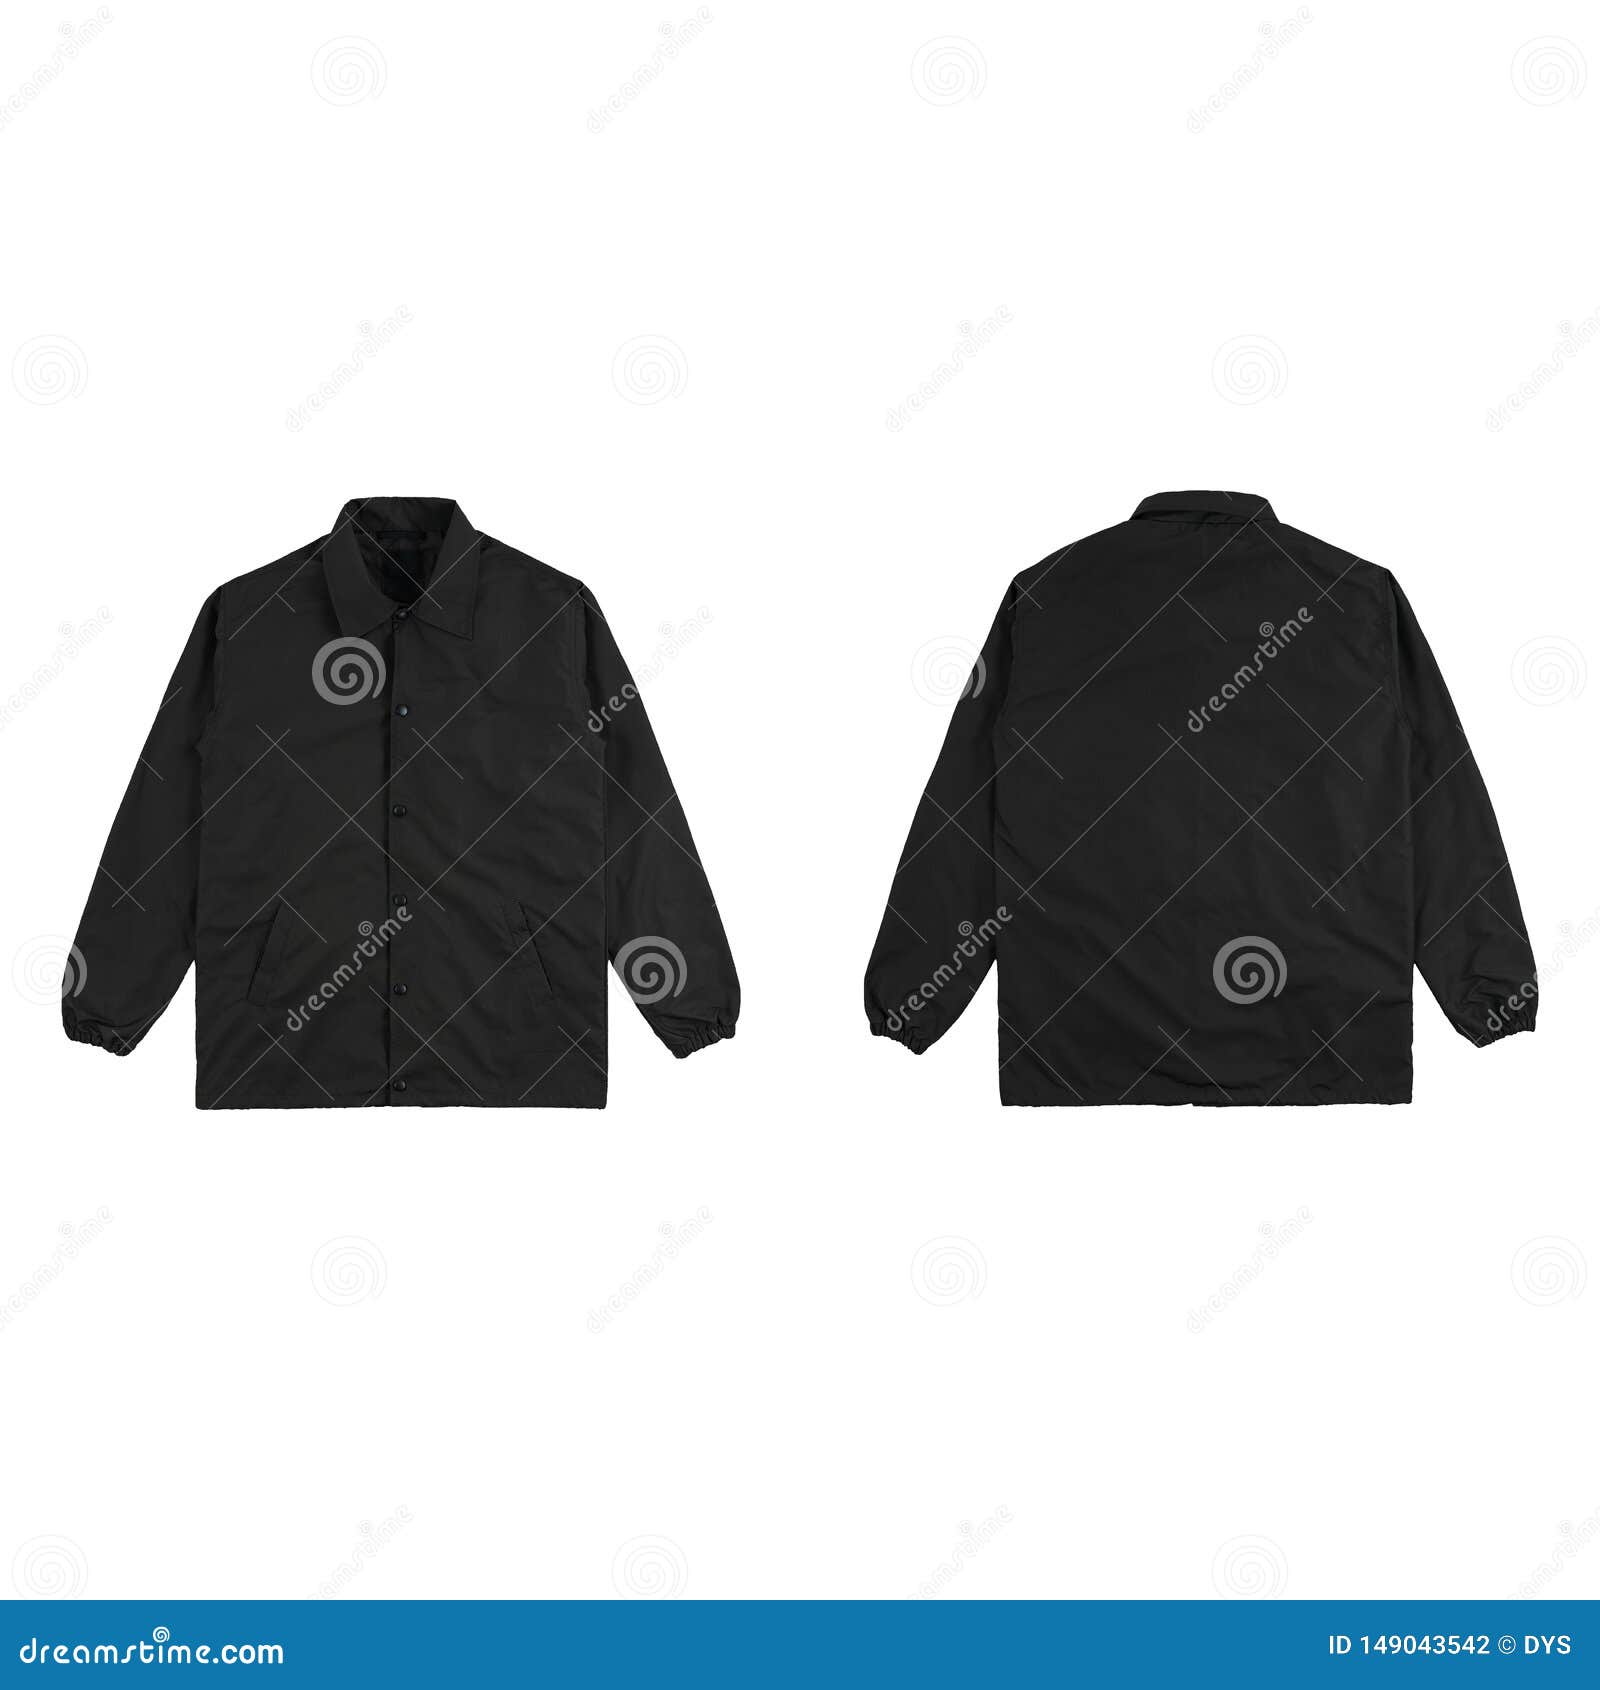 blank plain windbreaker jacket black color front and back side view  on white background. ready for your mock up